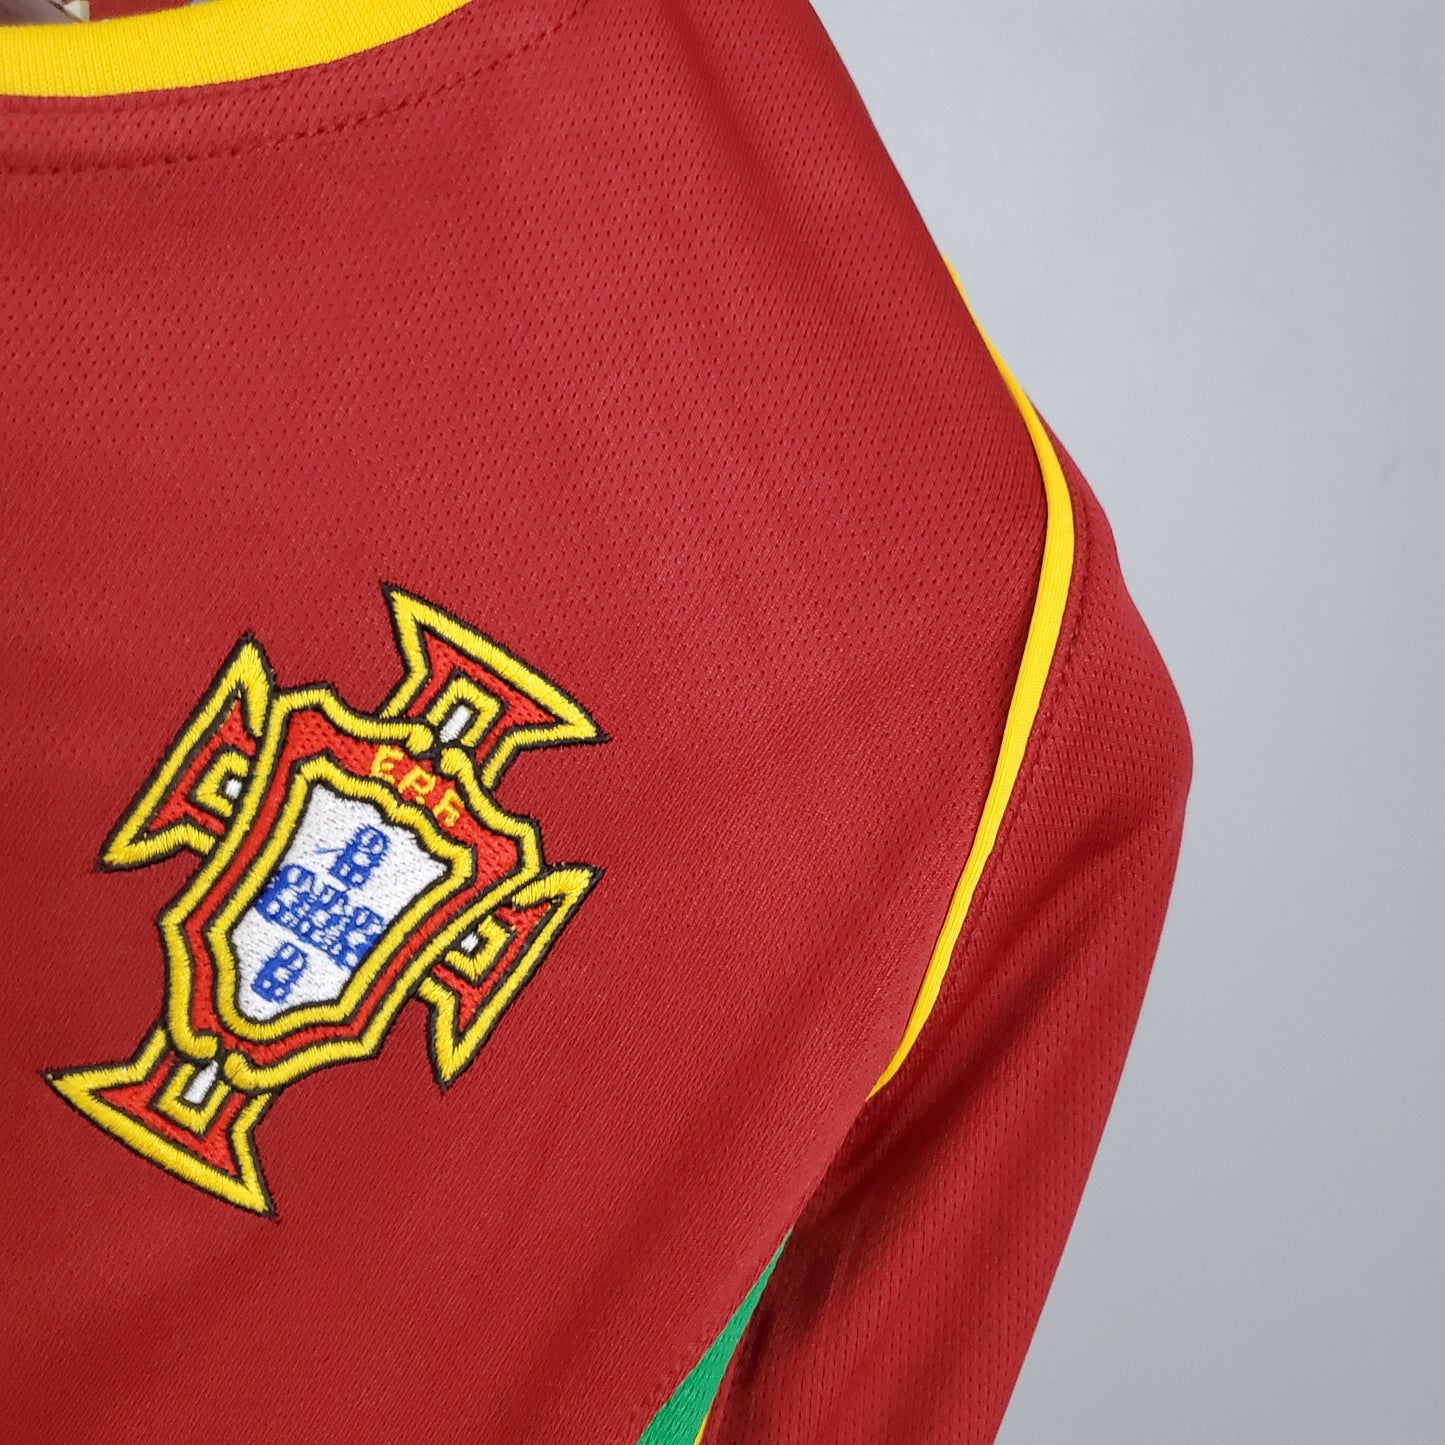 PORTUGAL 2002 HOME JERSEY